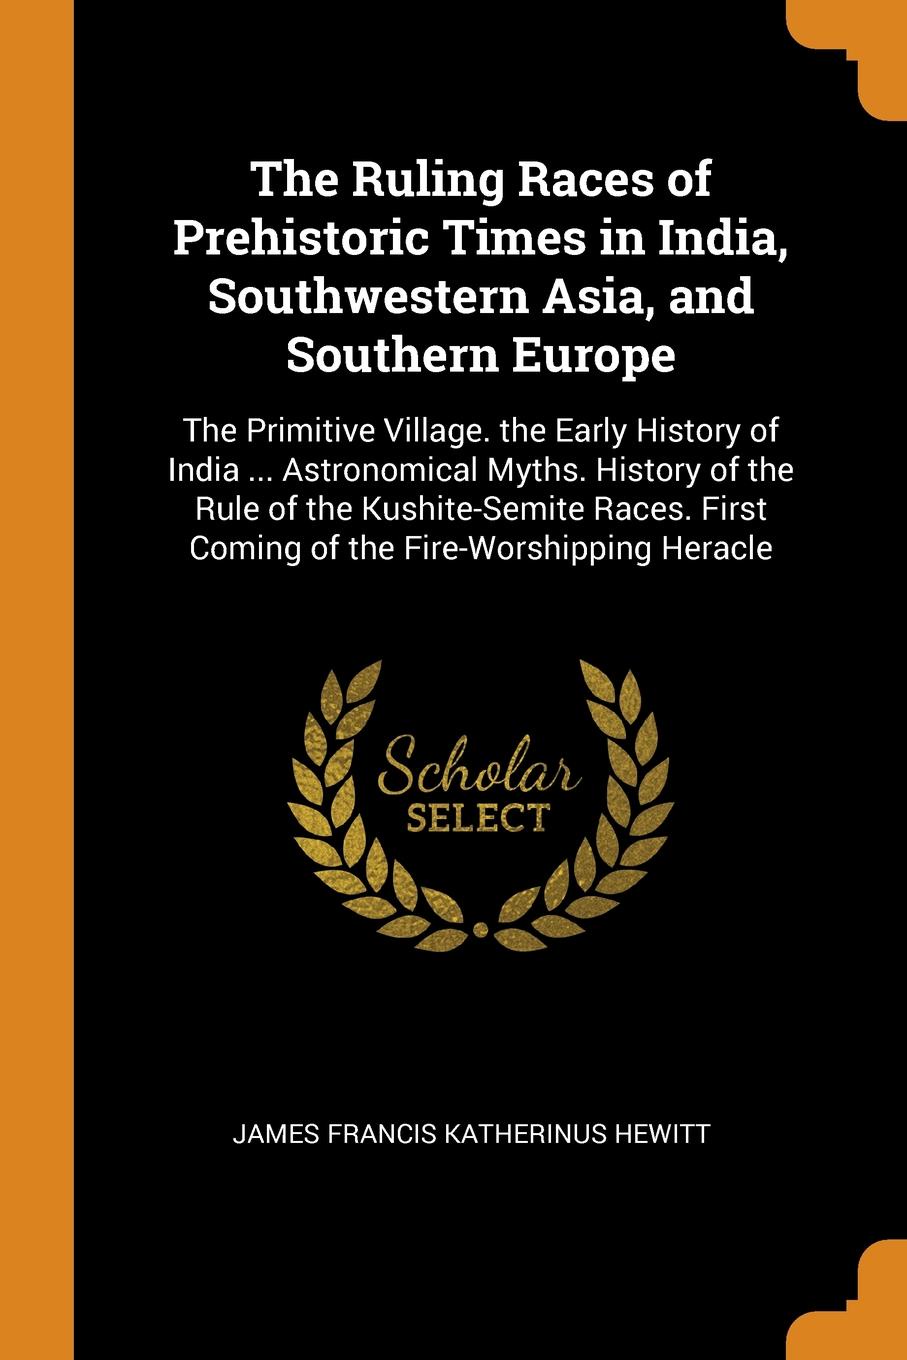 The Ruling Races of Prehistoric Times in India, Southwestern Asia, and Southern Europe. The Primitive Village. the Early History of India ... Astronomical Myths. History of the Rule of the Kushite-Semite Races. First Coming of the Fire-Worshipping...